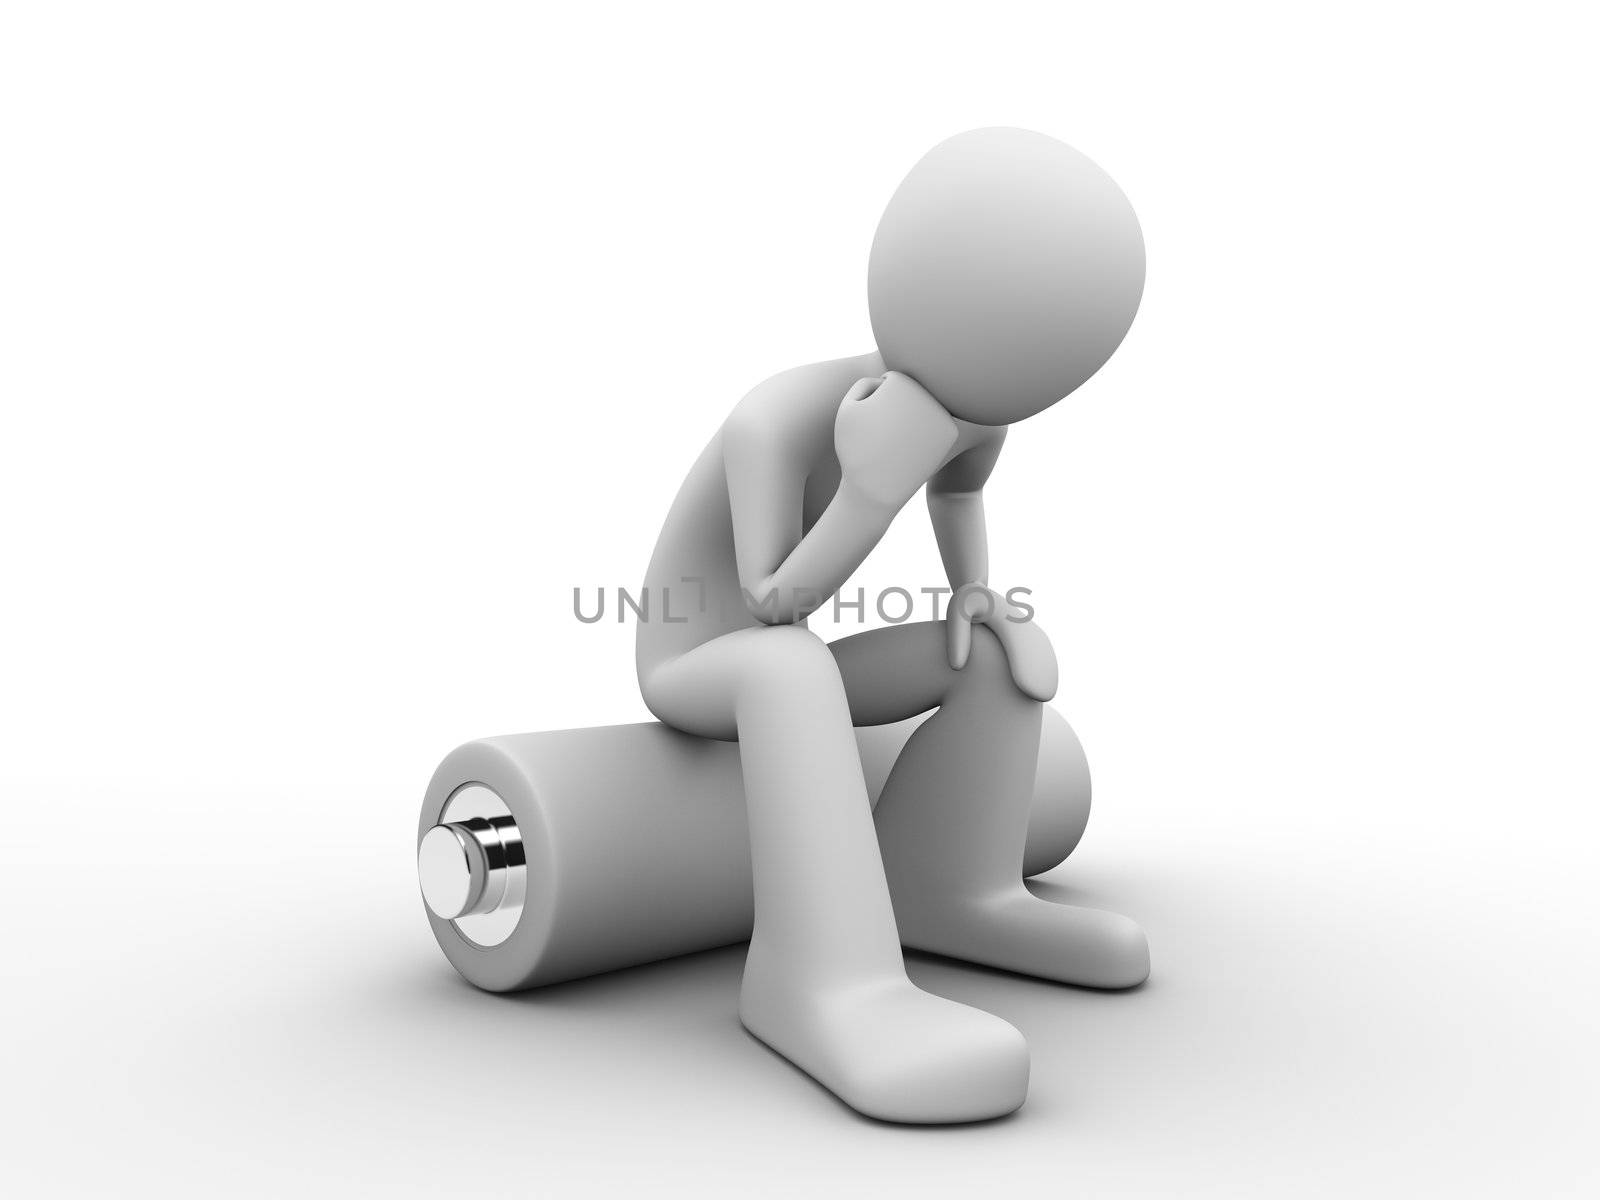 3d rendered copyspaced image with a man sitting on a battery and thinking about saving energy resources